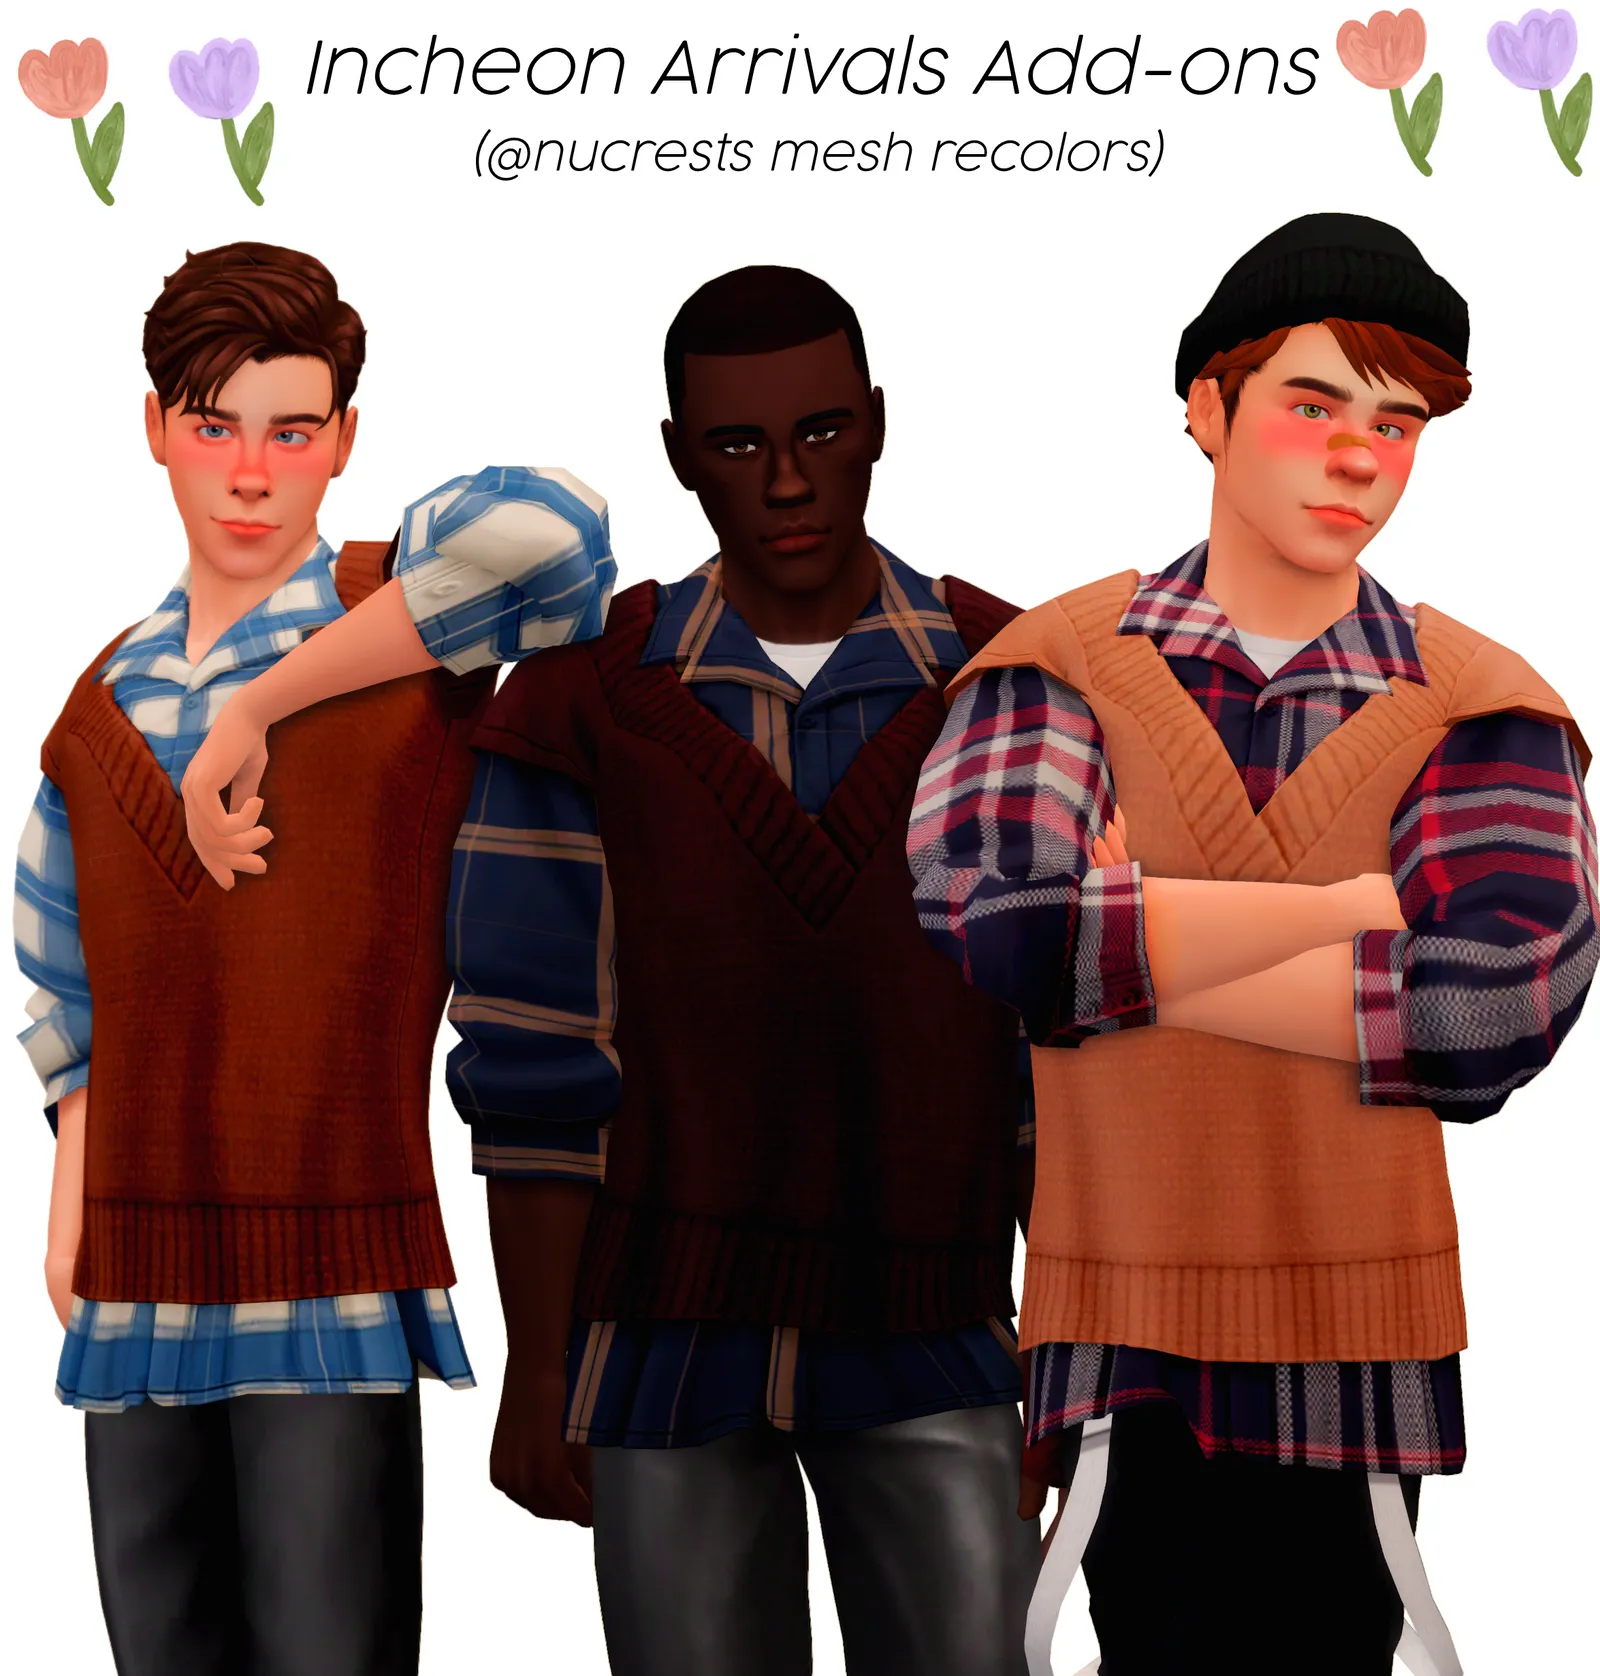 Incheon Arrivals Add-ons Recolors (nucrests mesh)